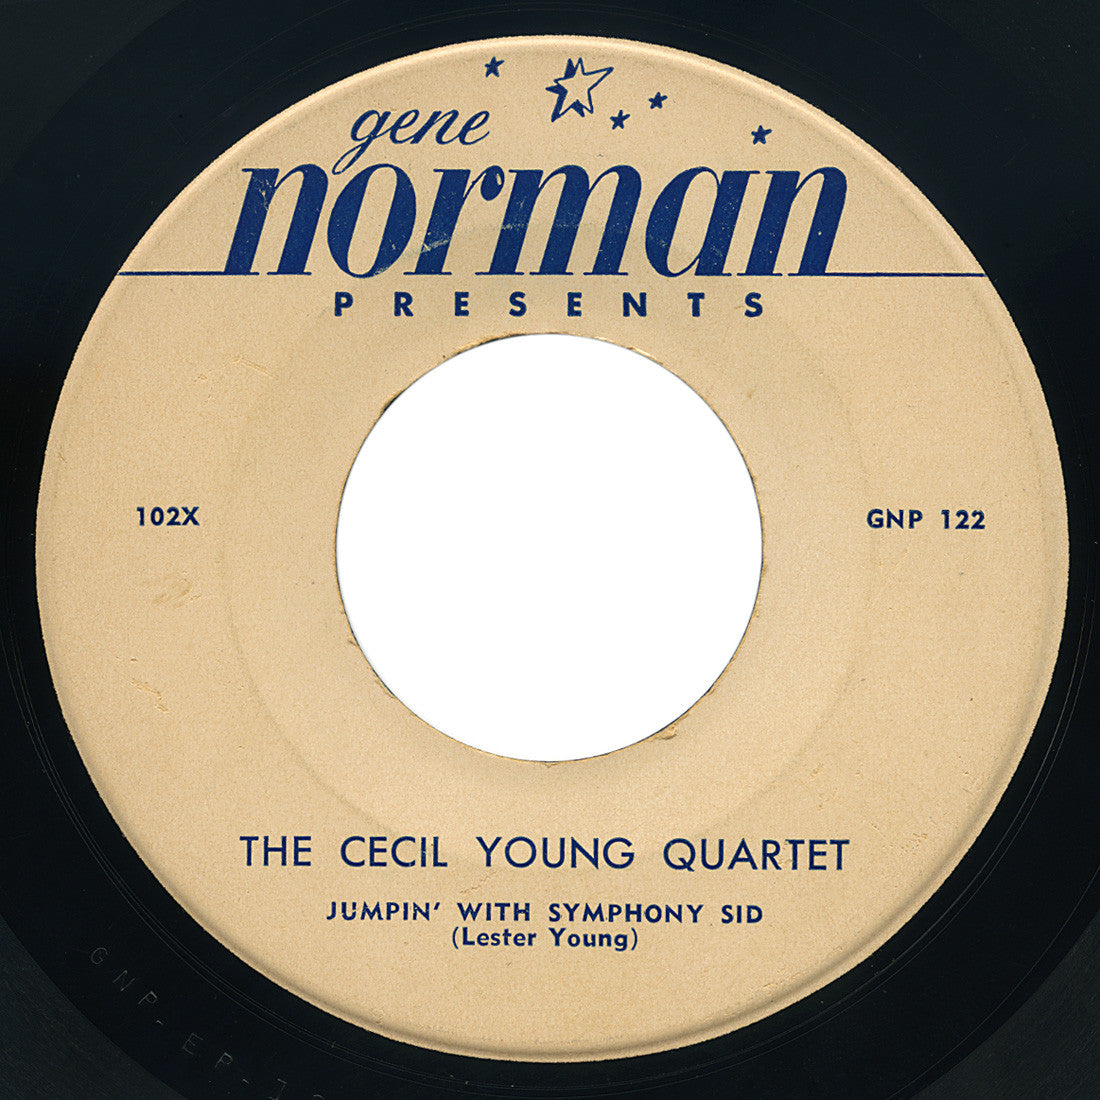 Cecil Young Quartet – Jumpin’ With Symphony Sid – Gene Norman Presents 